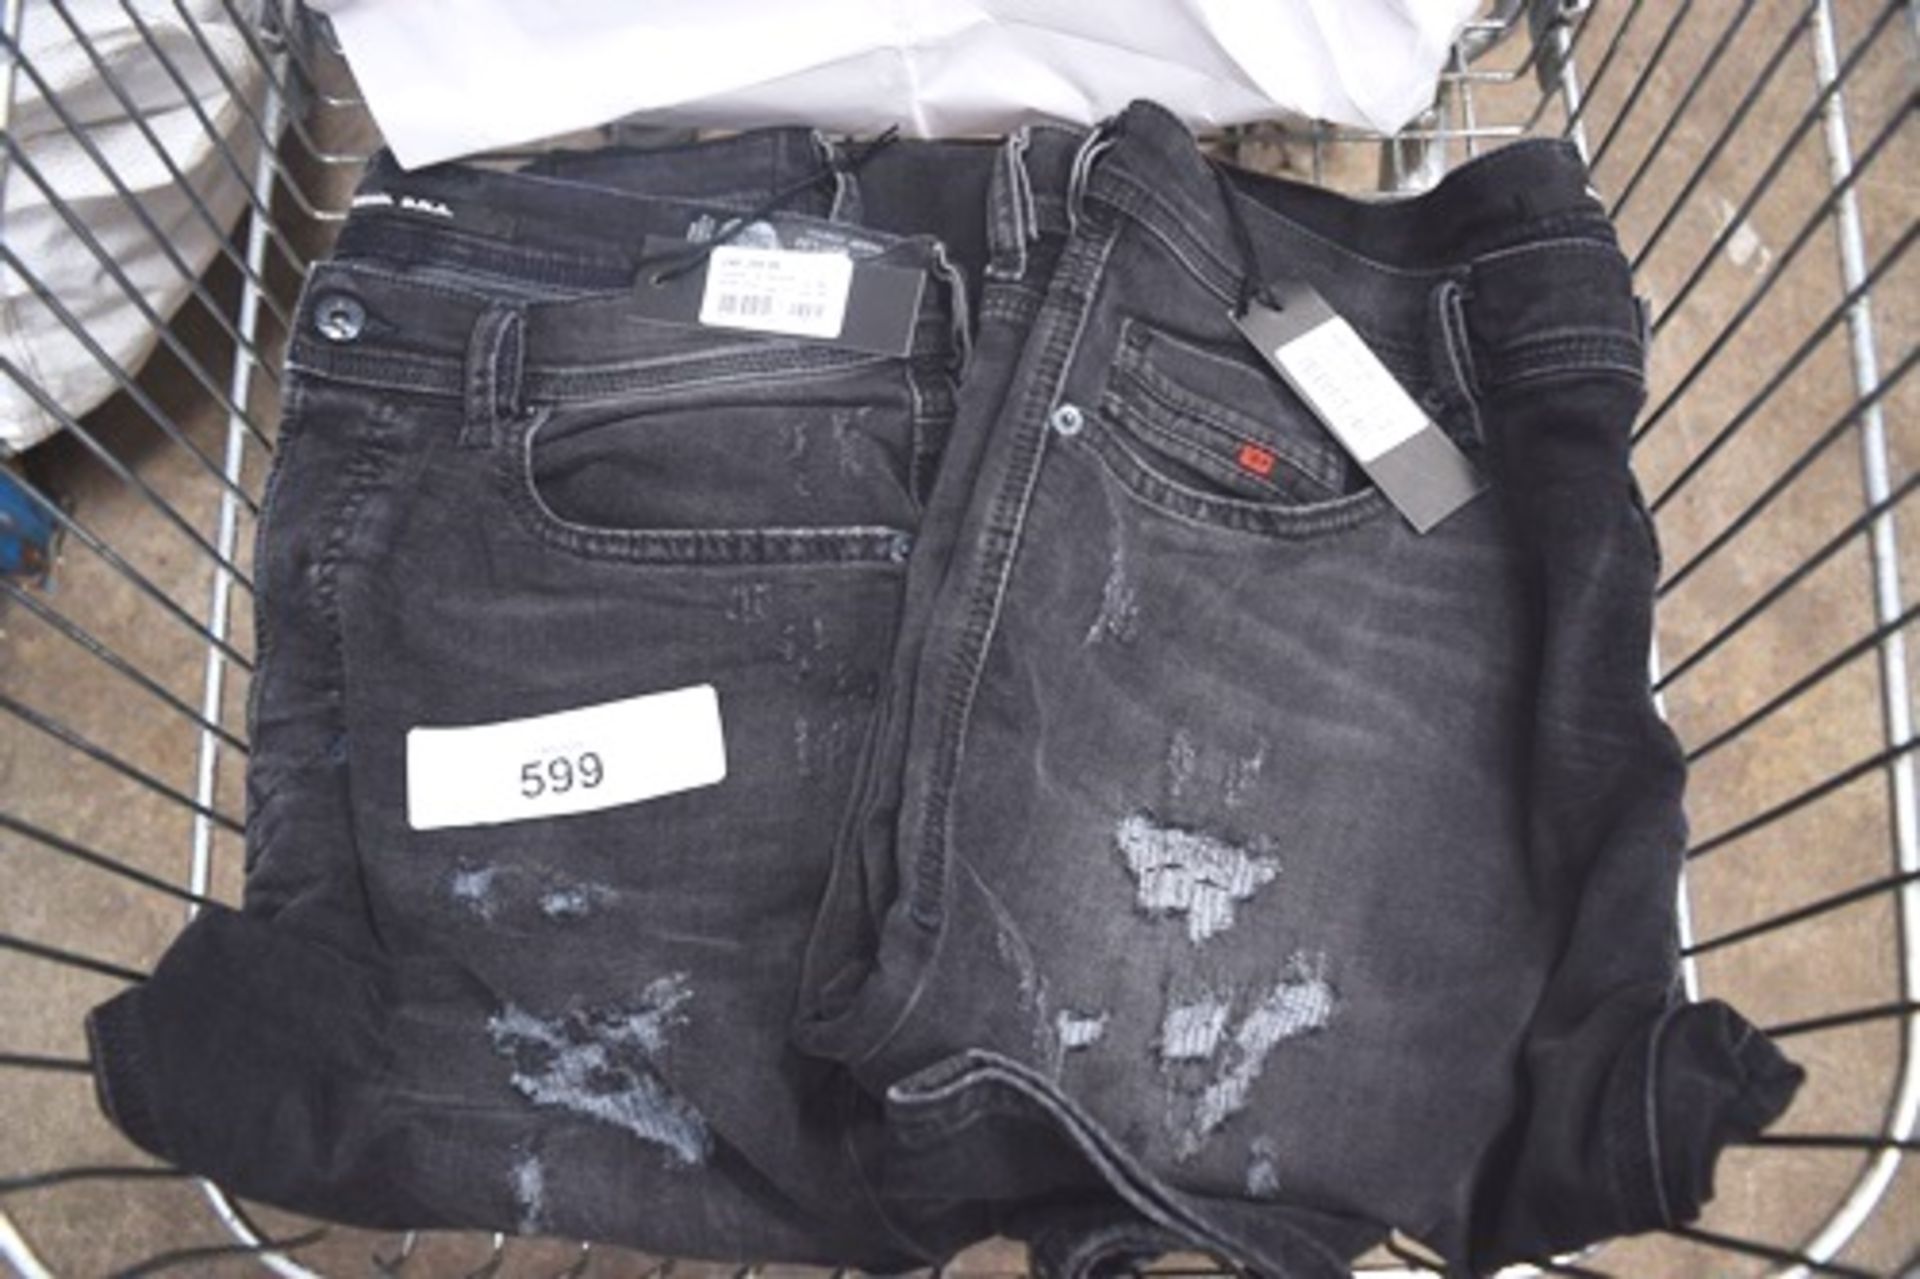 2 x pairs Diesel jeans comprising 1 x Tepphar size W36/L32 and 1 x Tepphar size W31/L32 - New (